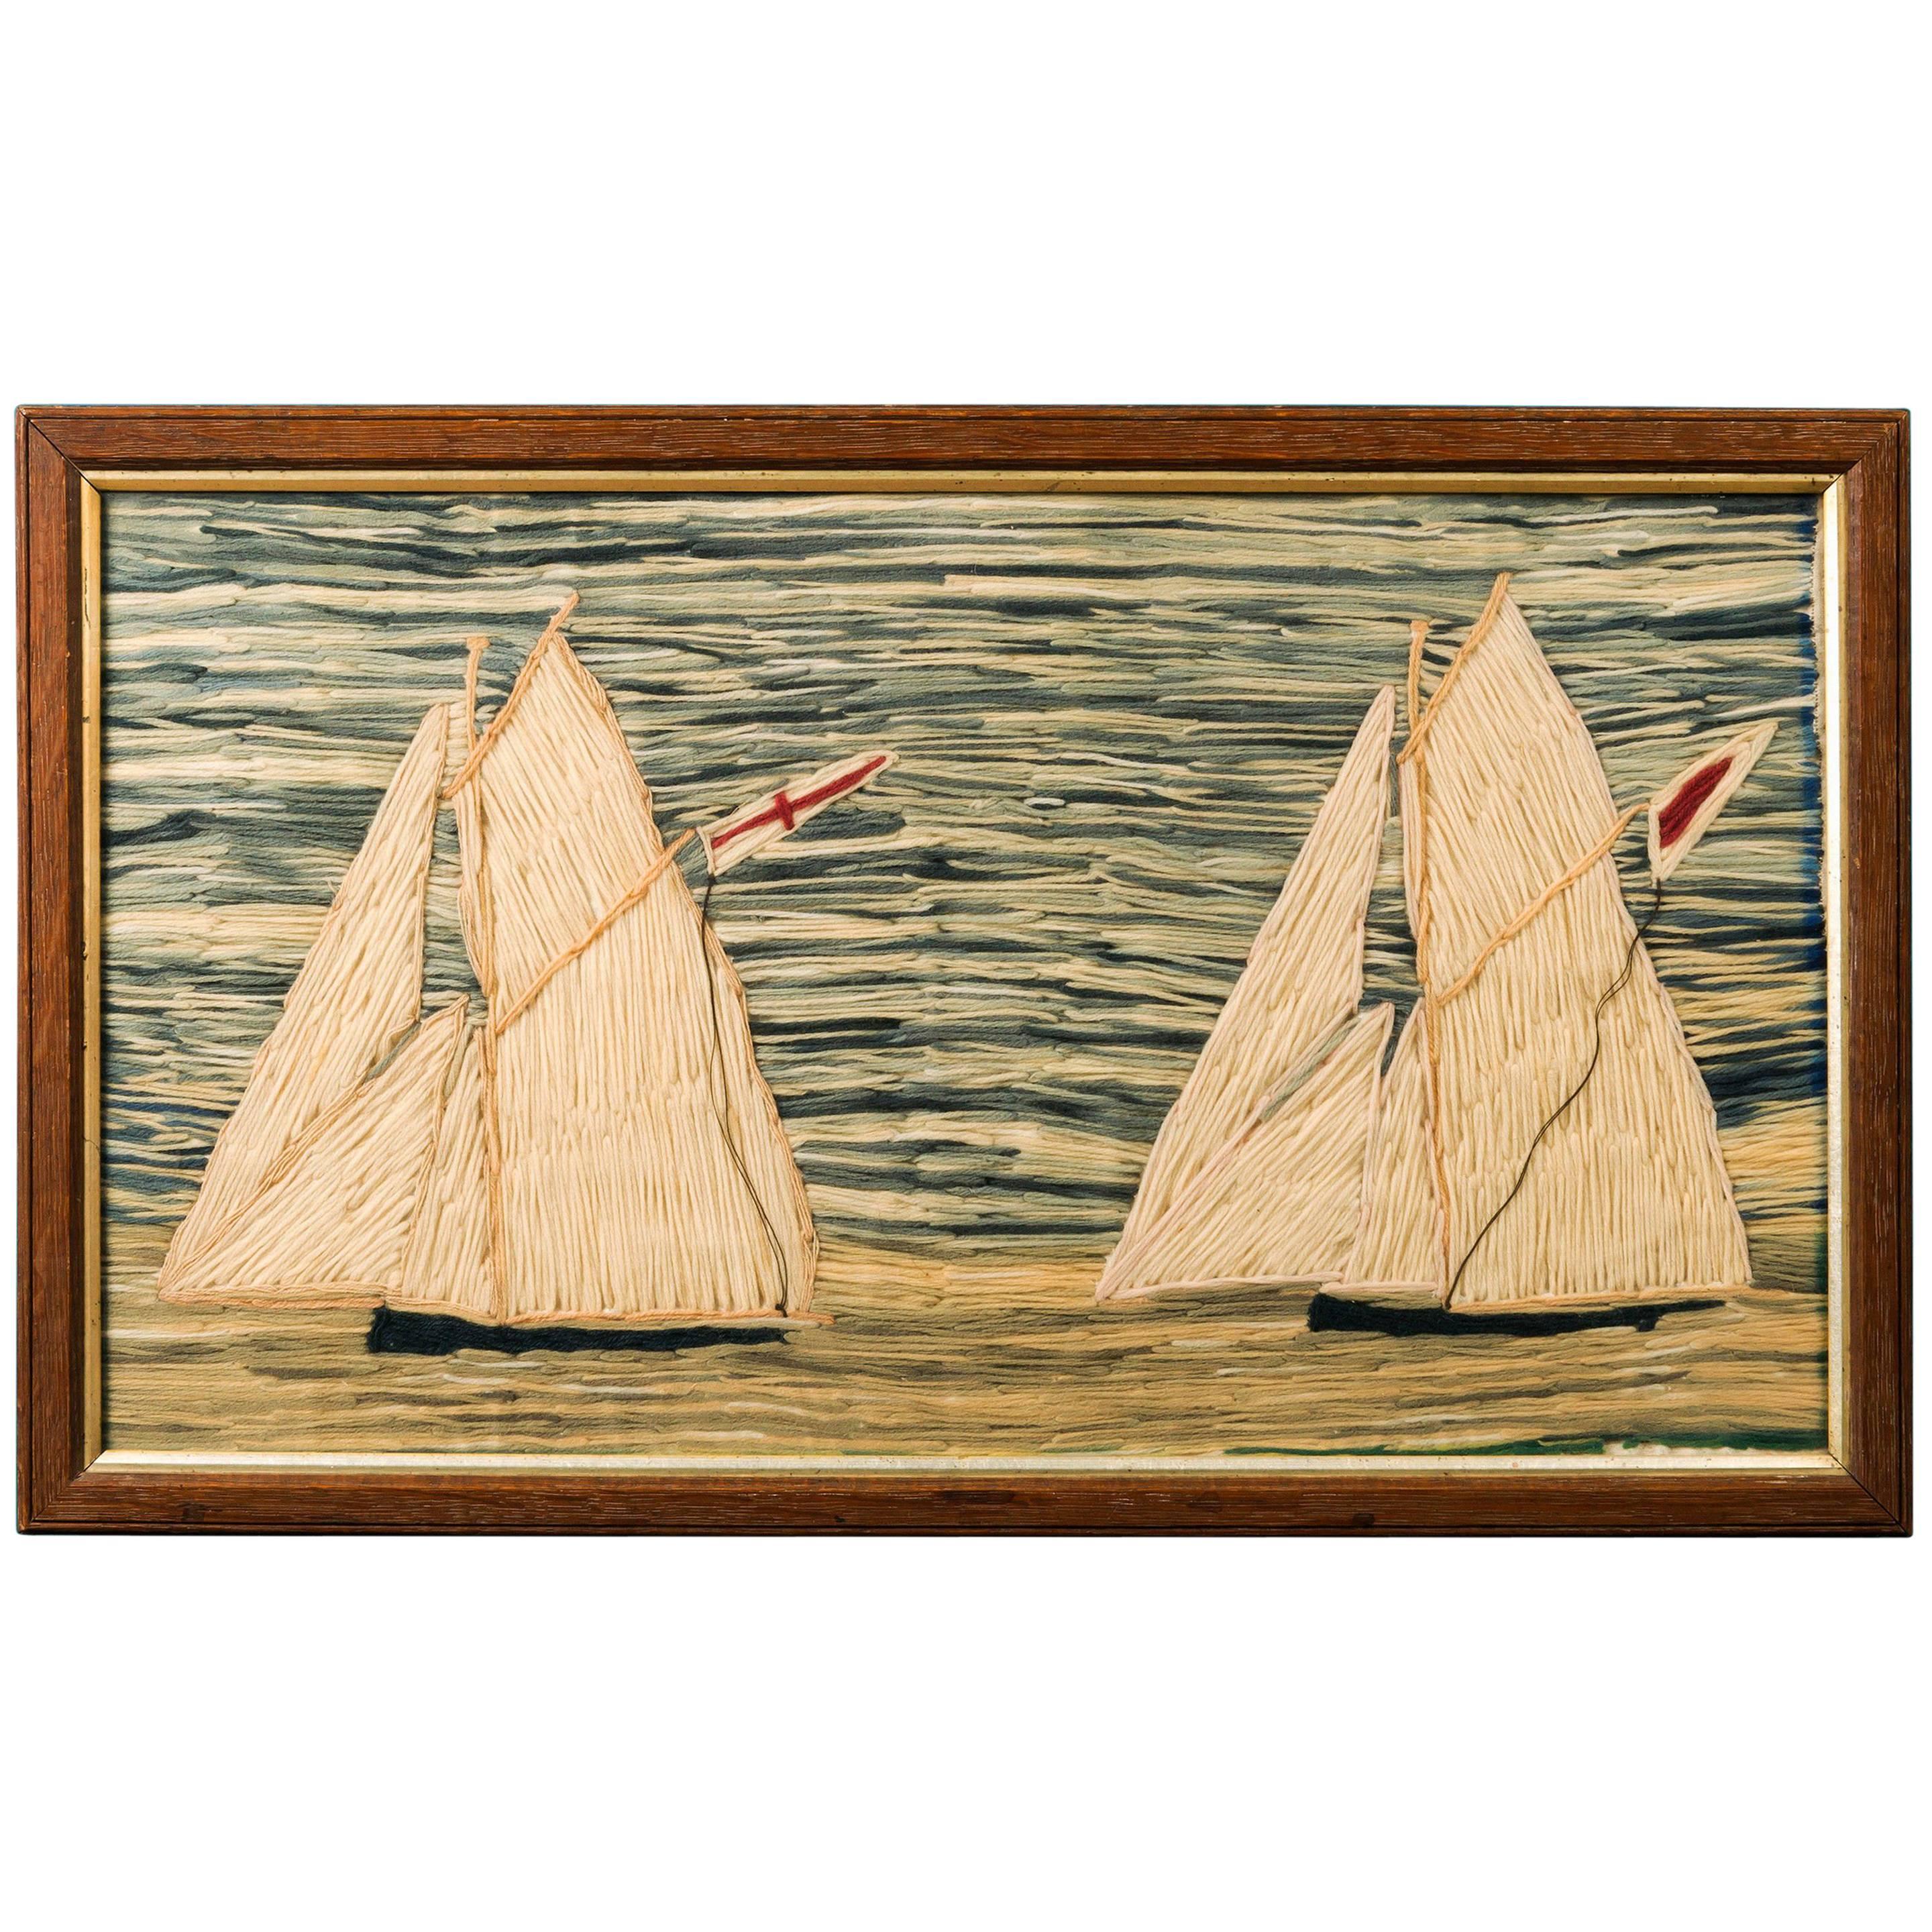 Wool Work Picture of Two Gaff Rigged Cutters For Sale